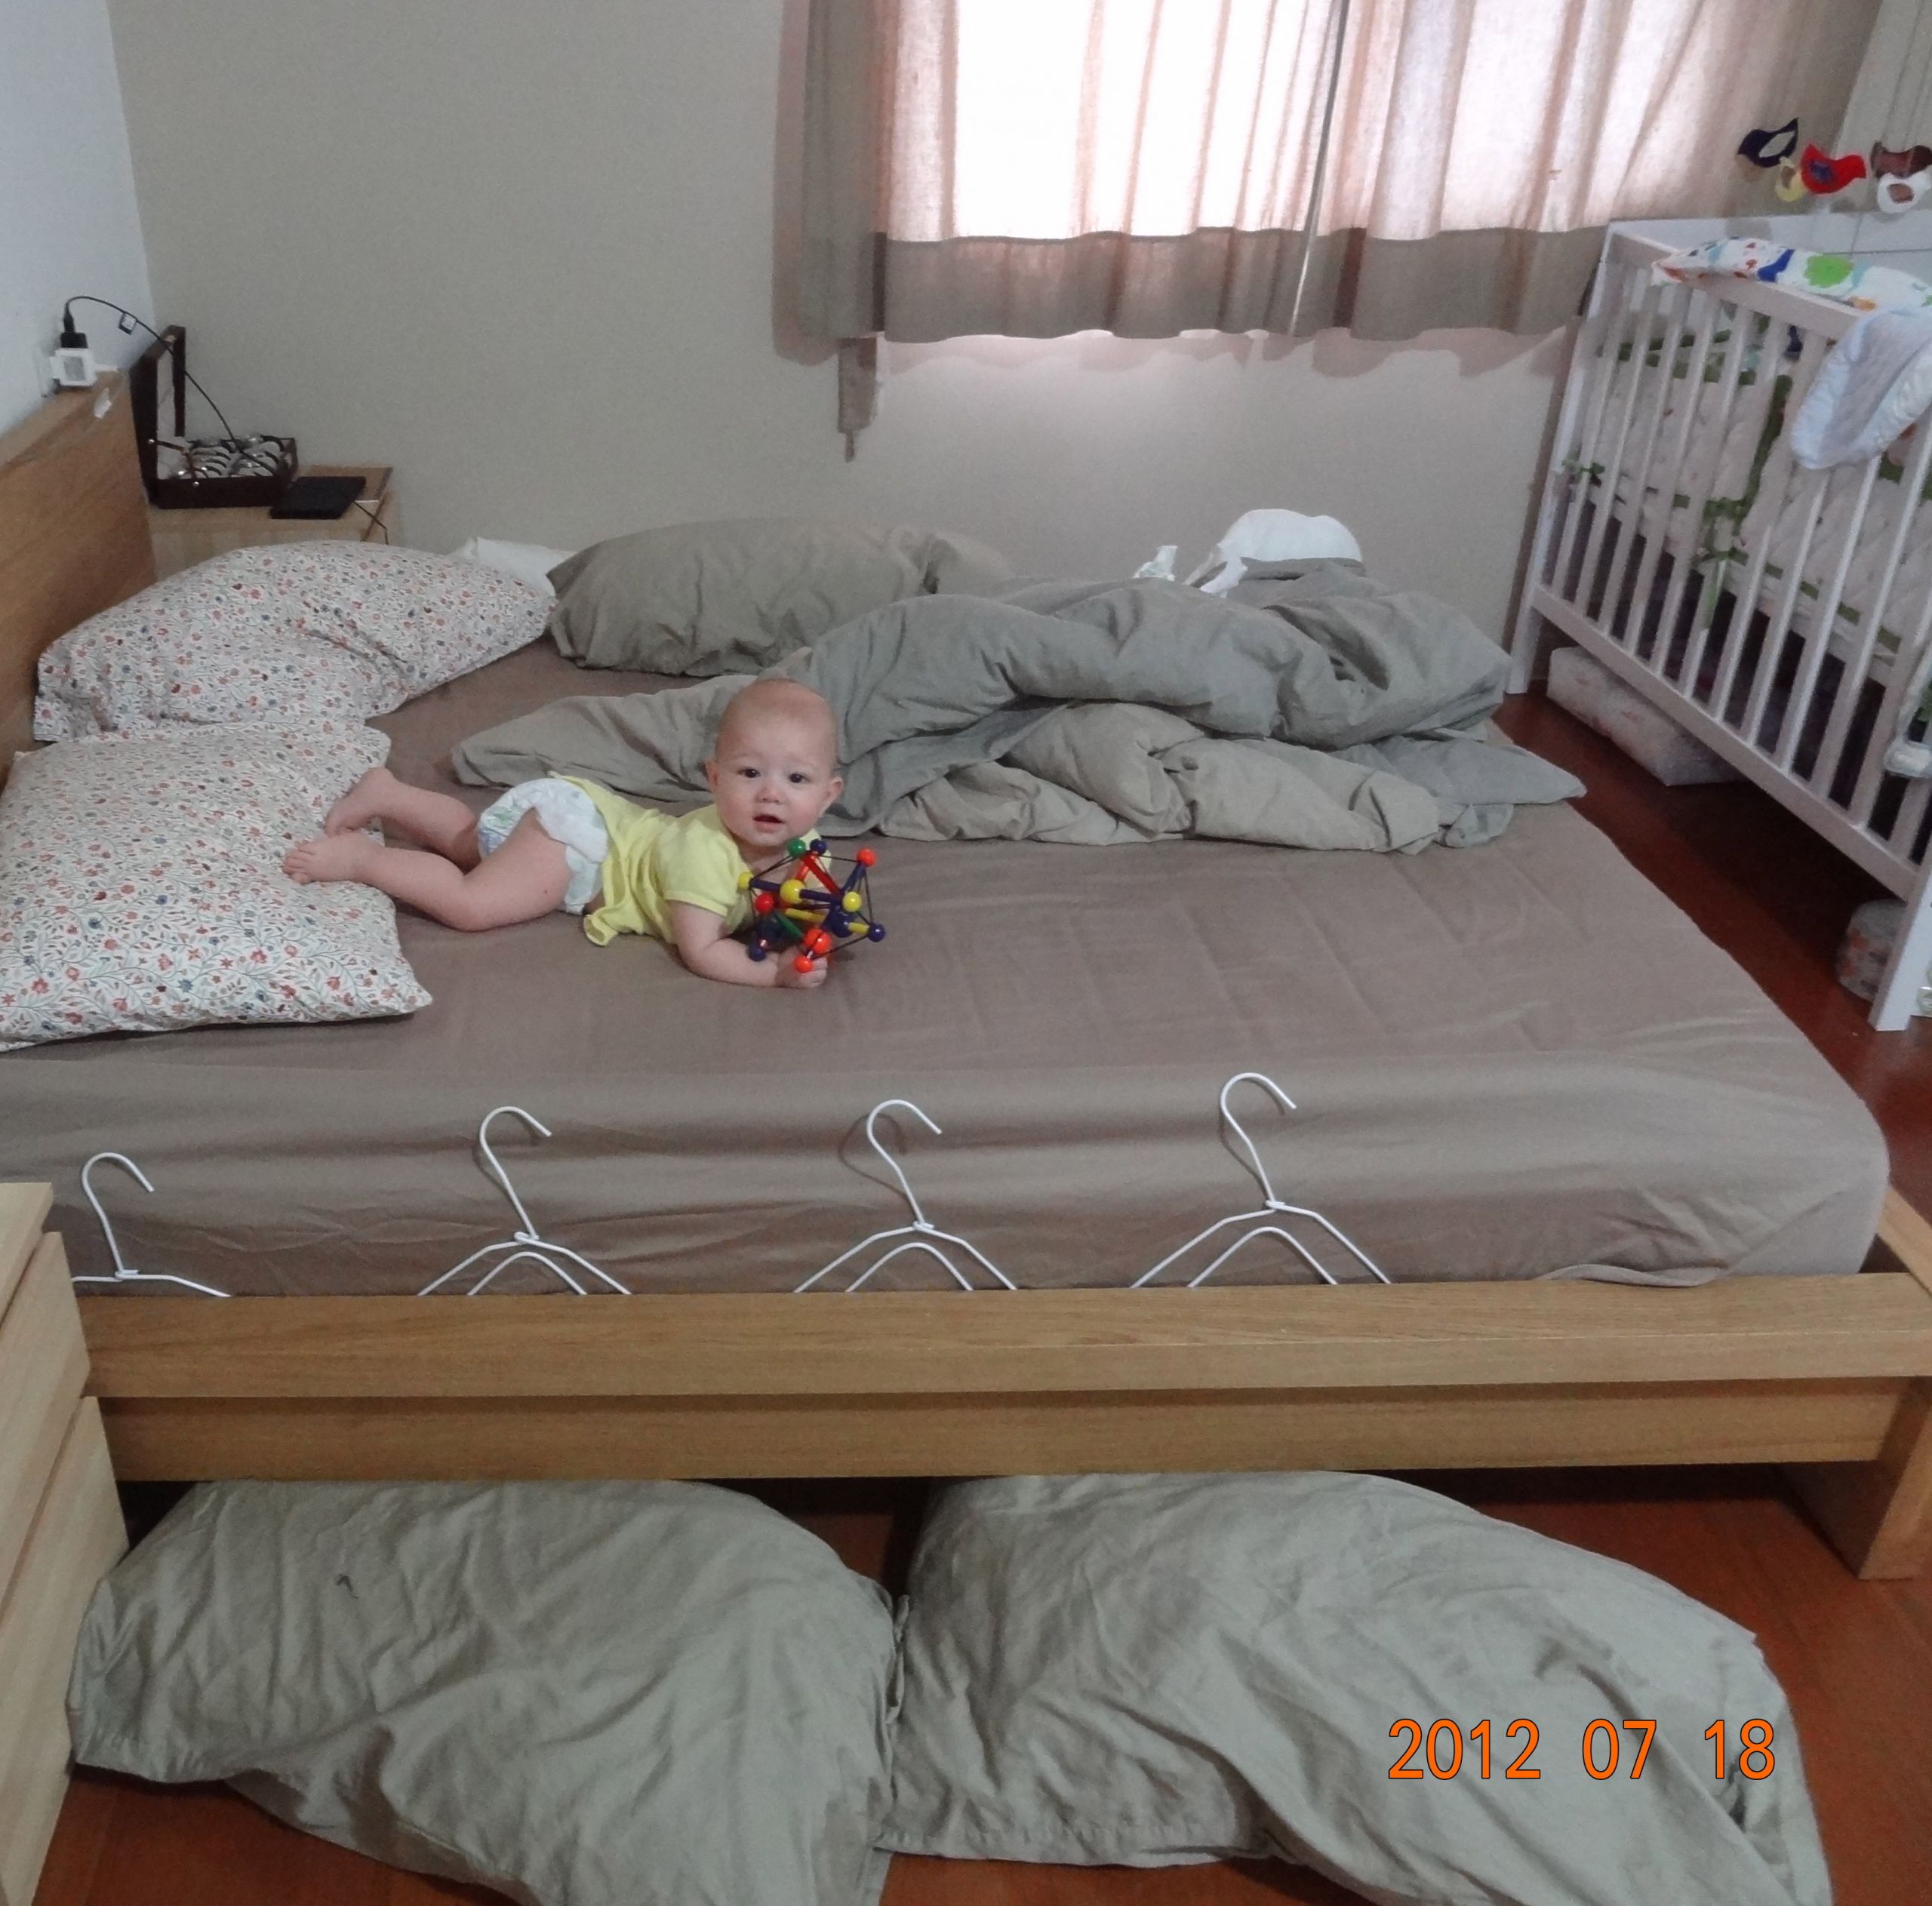 DIY Bed Rails For Toddlers
 DIY baby Bedrail with swimming noodle